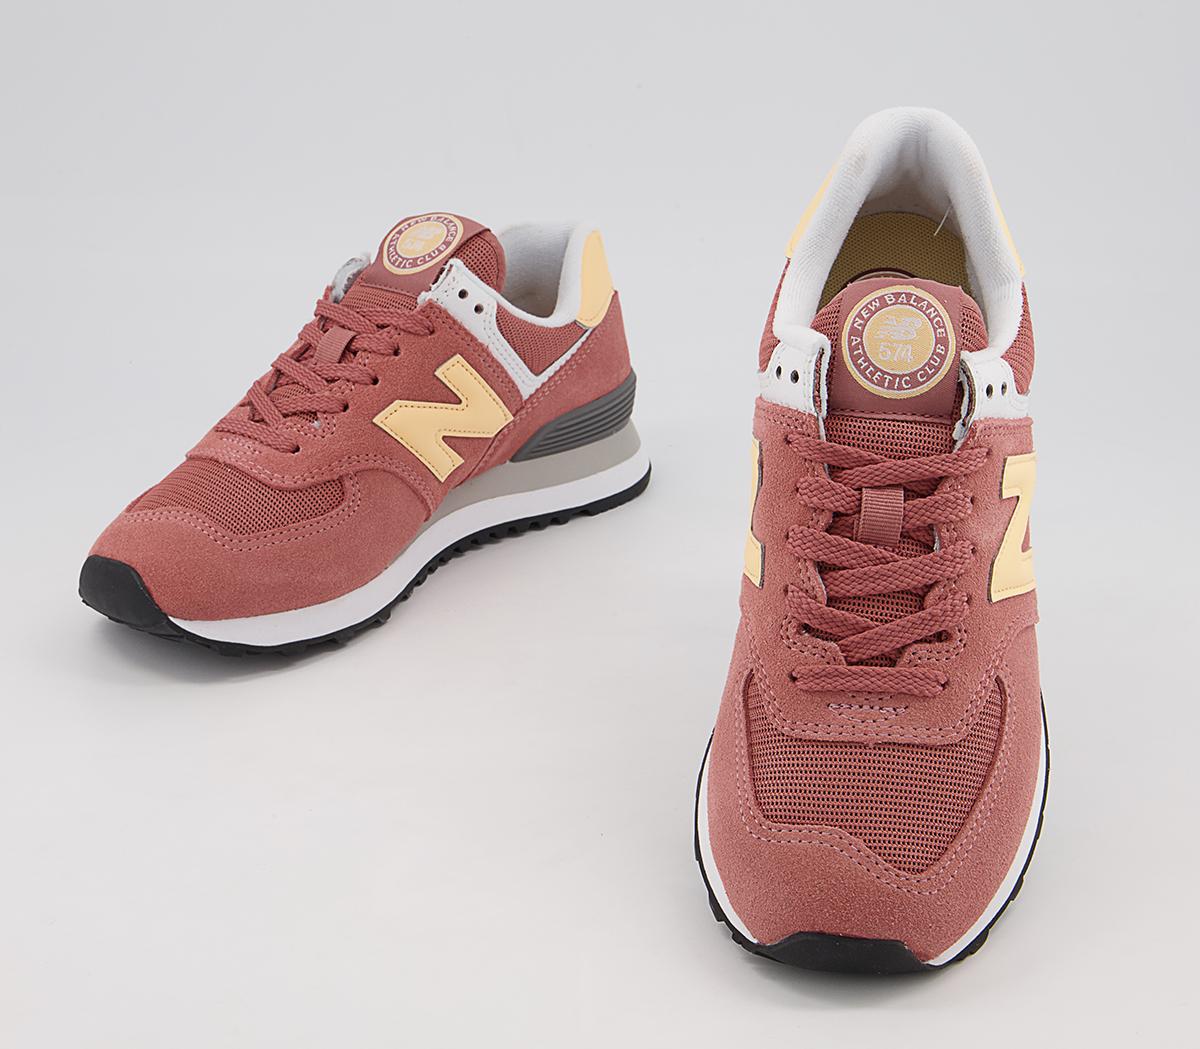 New Balance 574 Trainers Pink Peach - His trainers